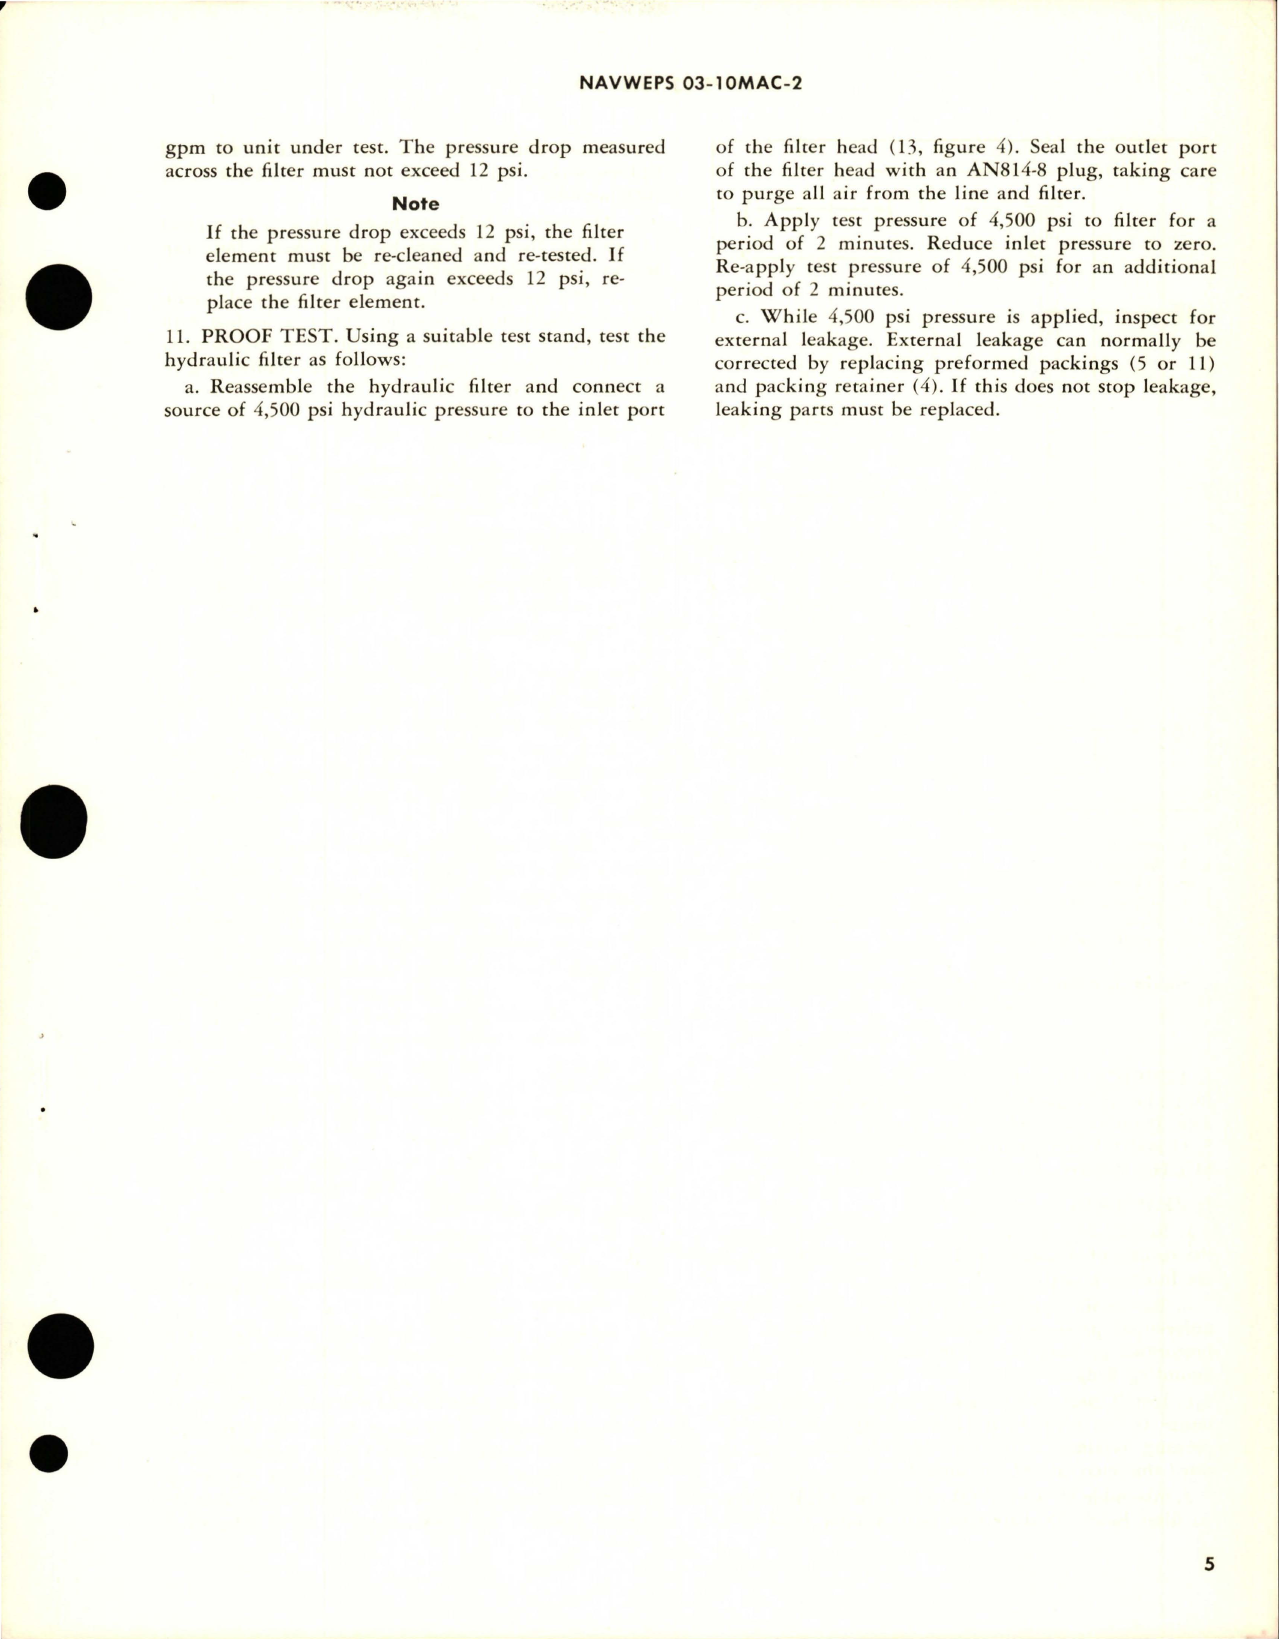 Sample page 5 from AirCorps Library document: Overhaul Instructions with Parts Breakdown for Hydraulic Filter - Part AC-2061-8